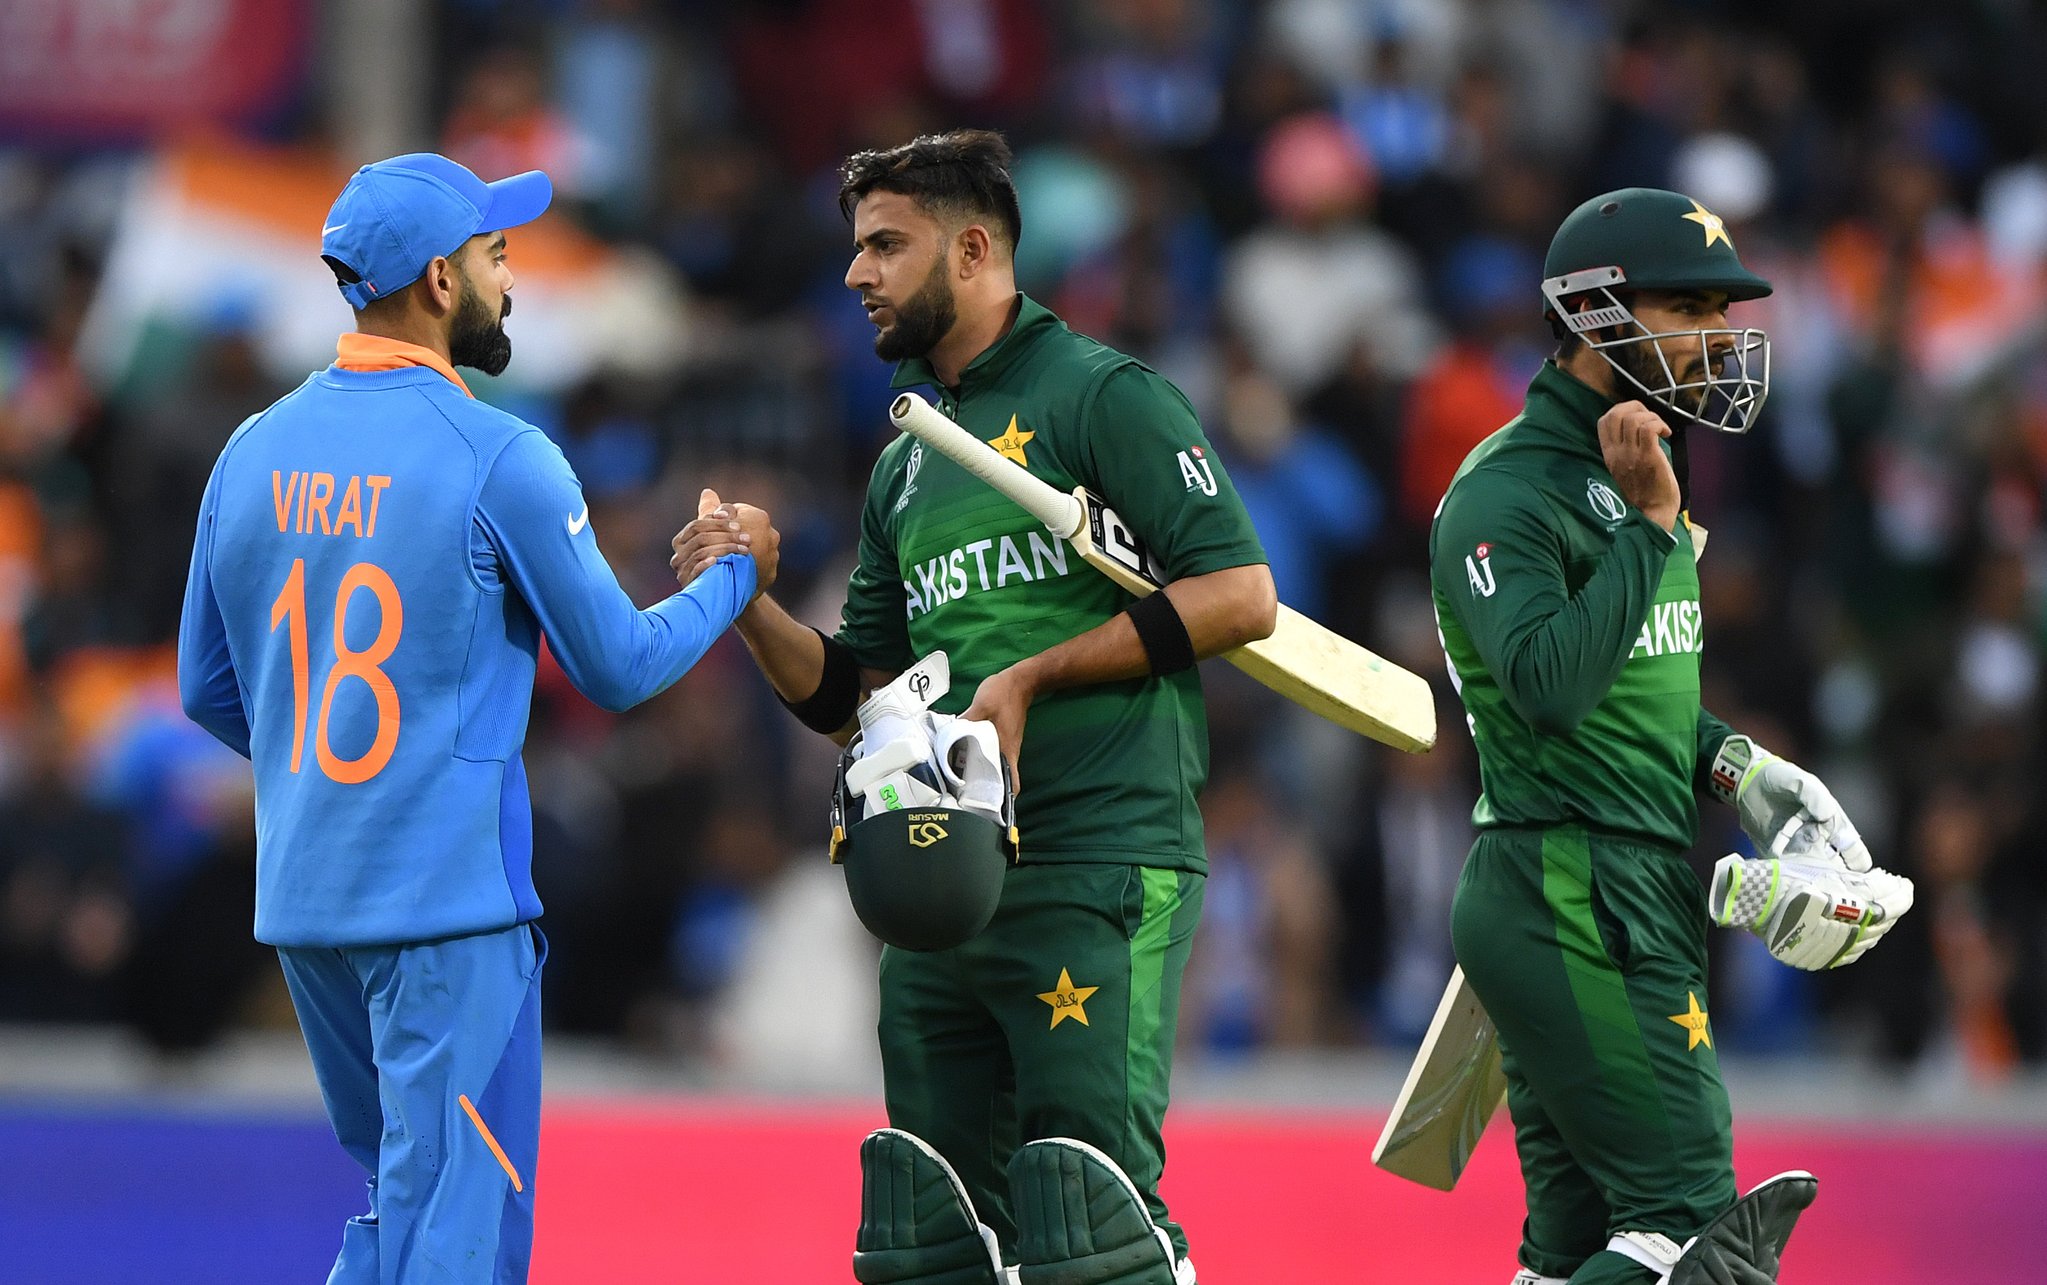 World Cup 2019: Pakistan has fallen behind the ranks in ODIs 9